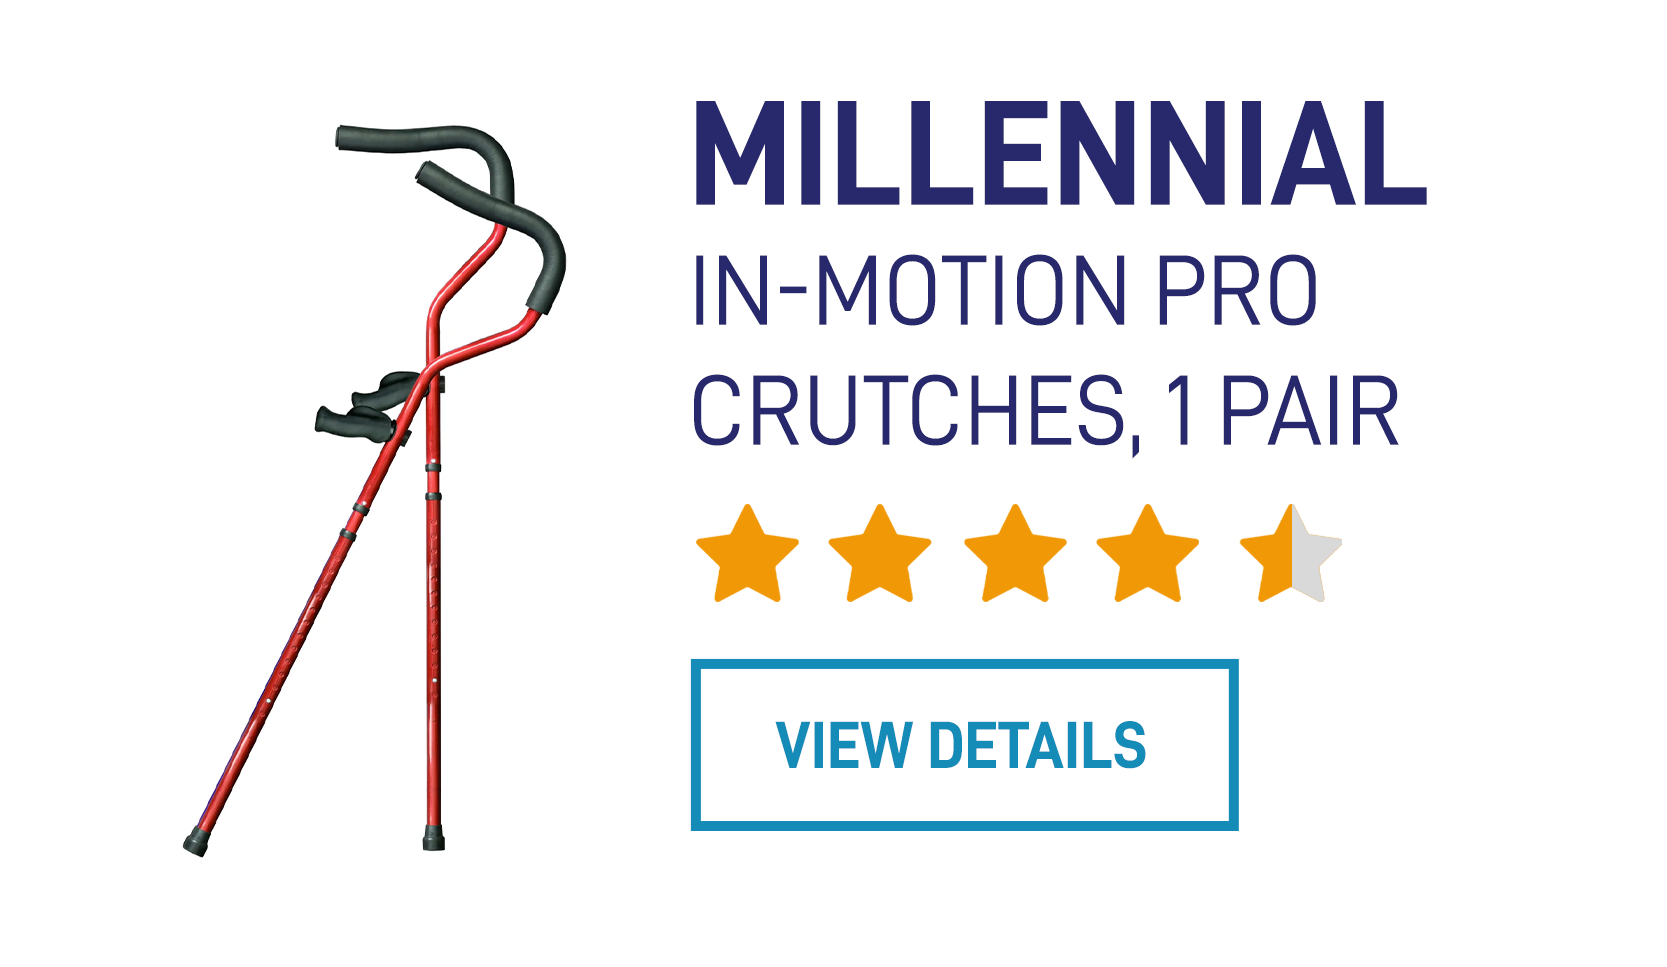 Millennial In-Motion Pro Crutches